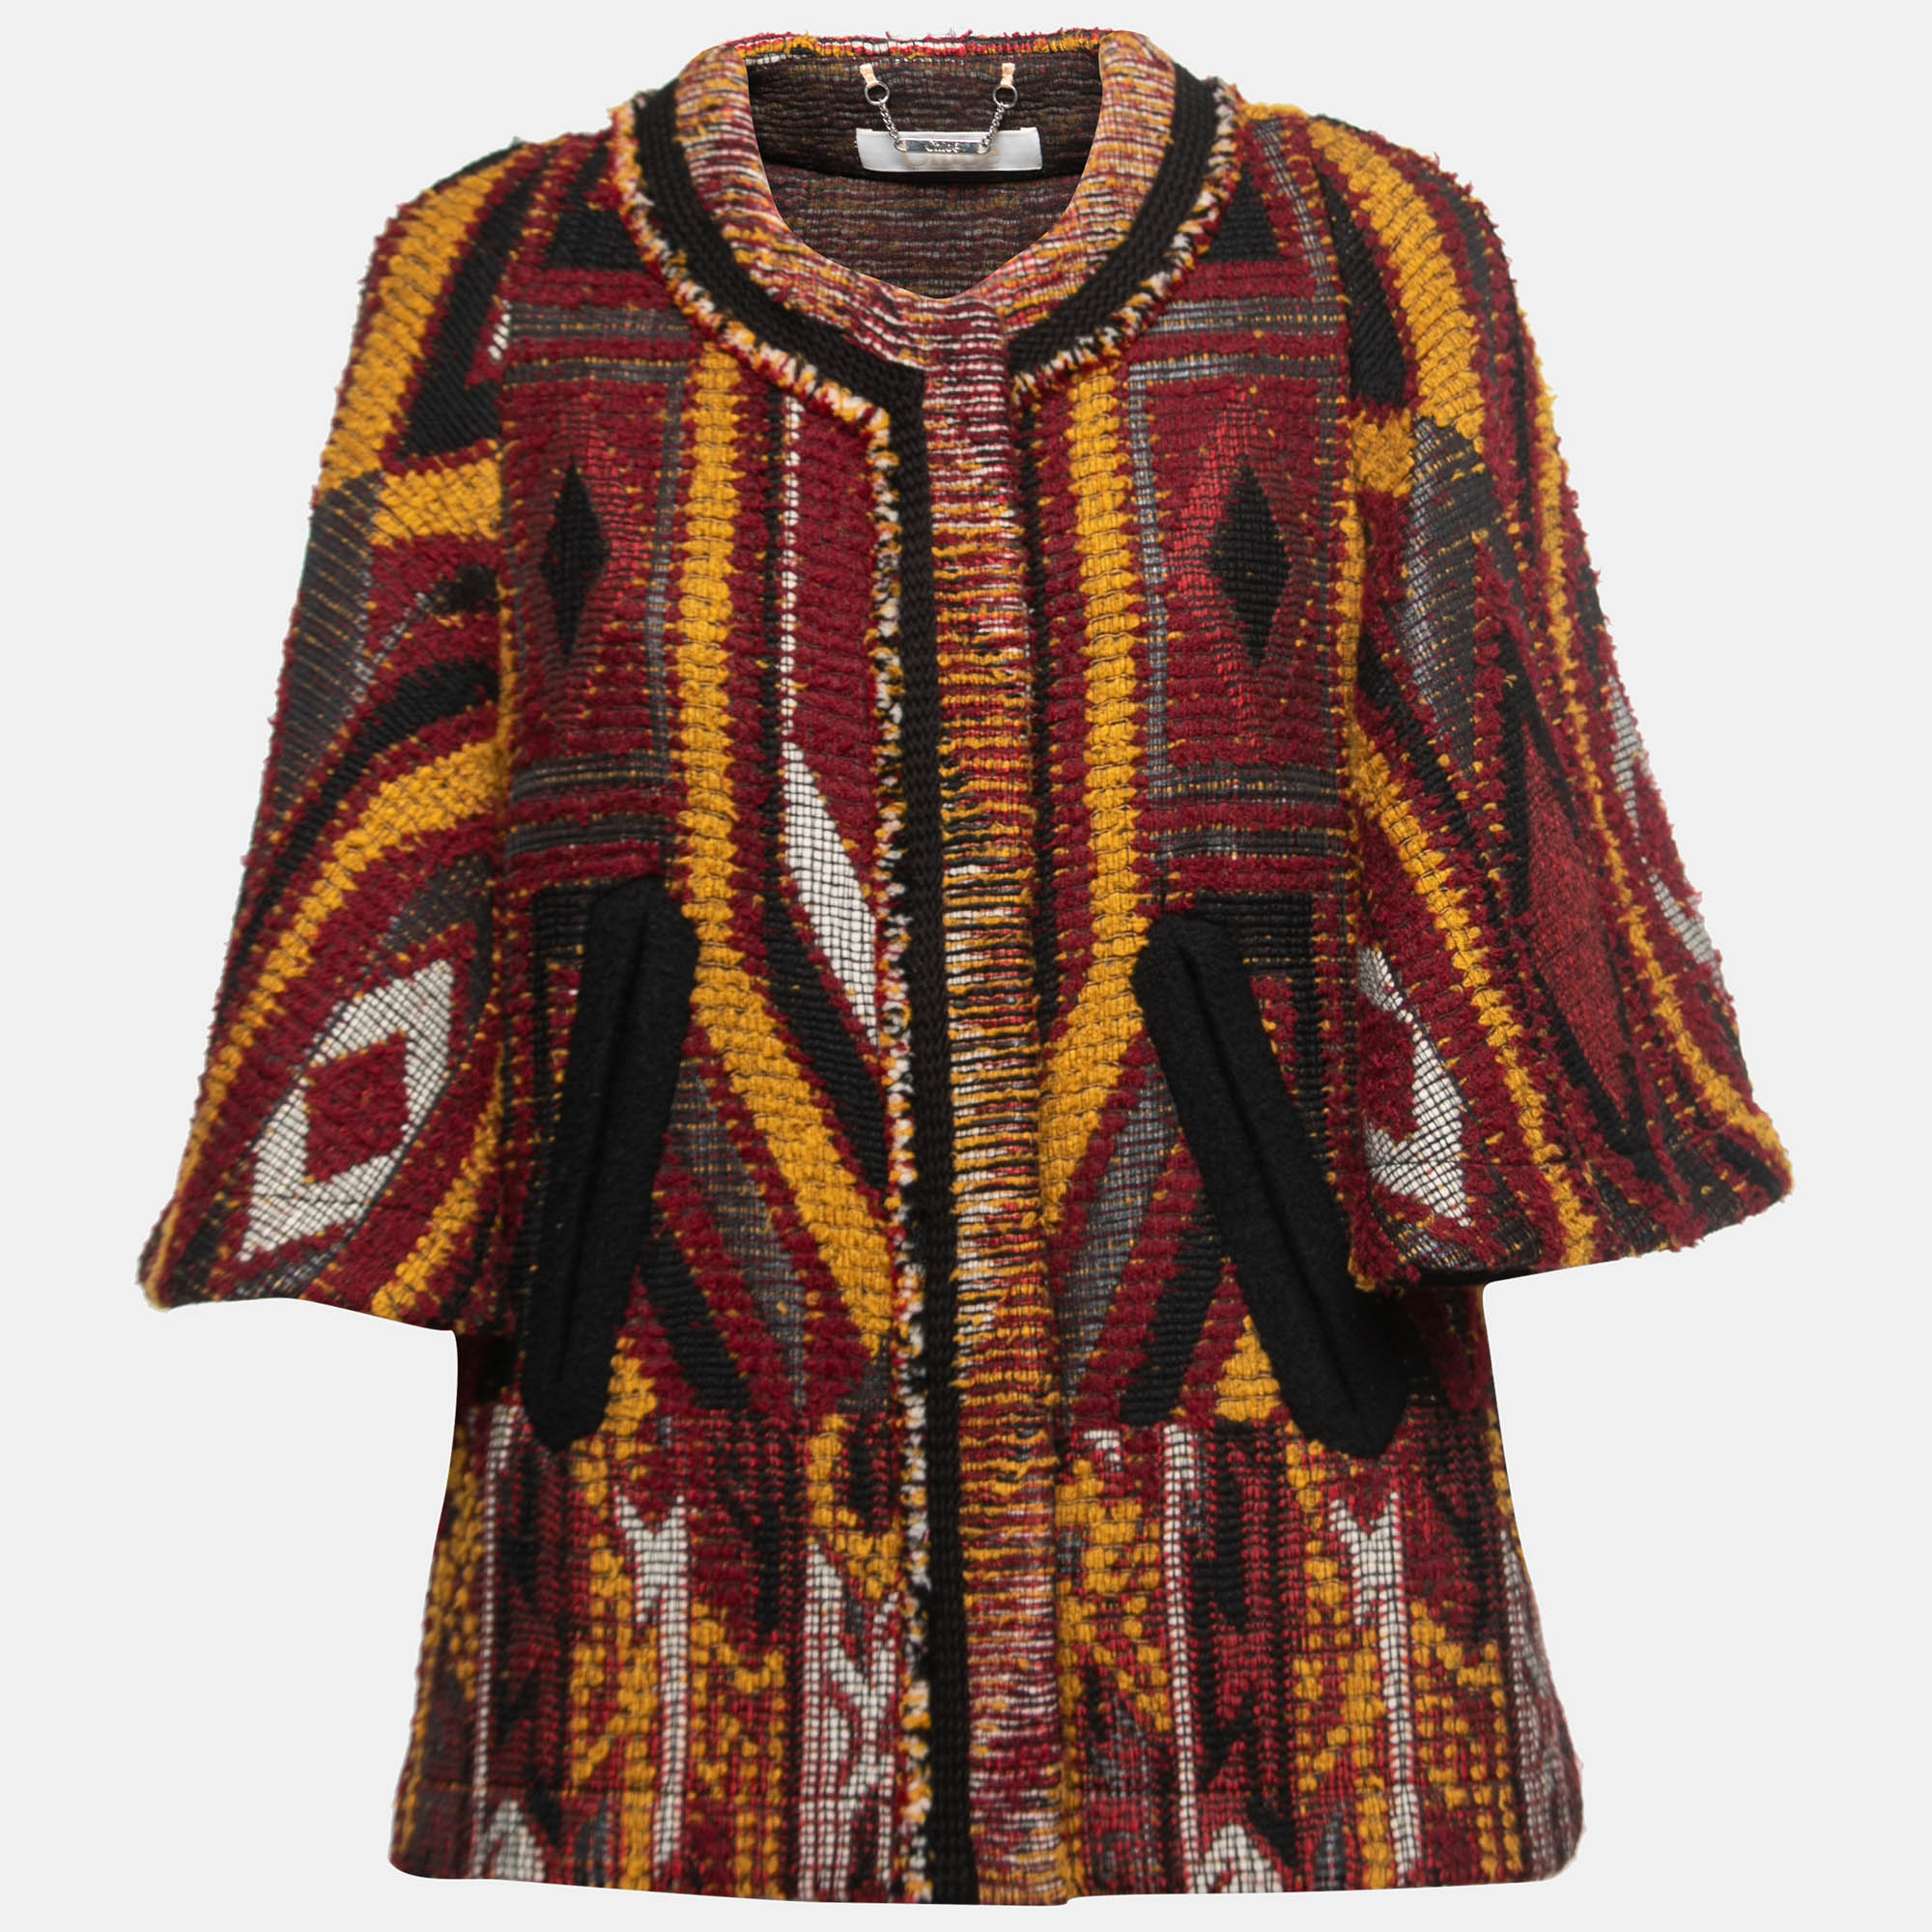 The Chloé coat is a stunning outerwear piece that combines style and warmth. This cape coat features a vibrant multicolor tribal pattern woven into a textured boucle tweed fabric. With its relaxed cape silhouette and intricate design its a fashion statement for any occasion.